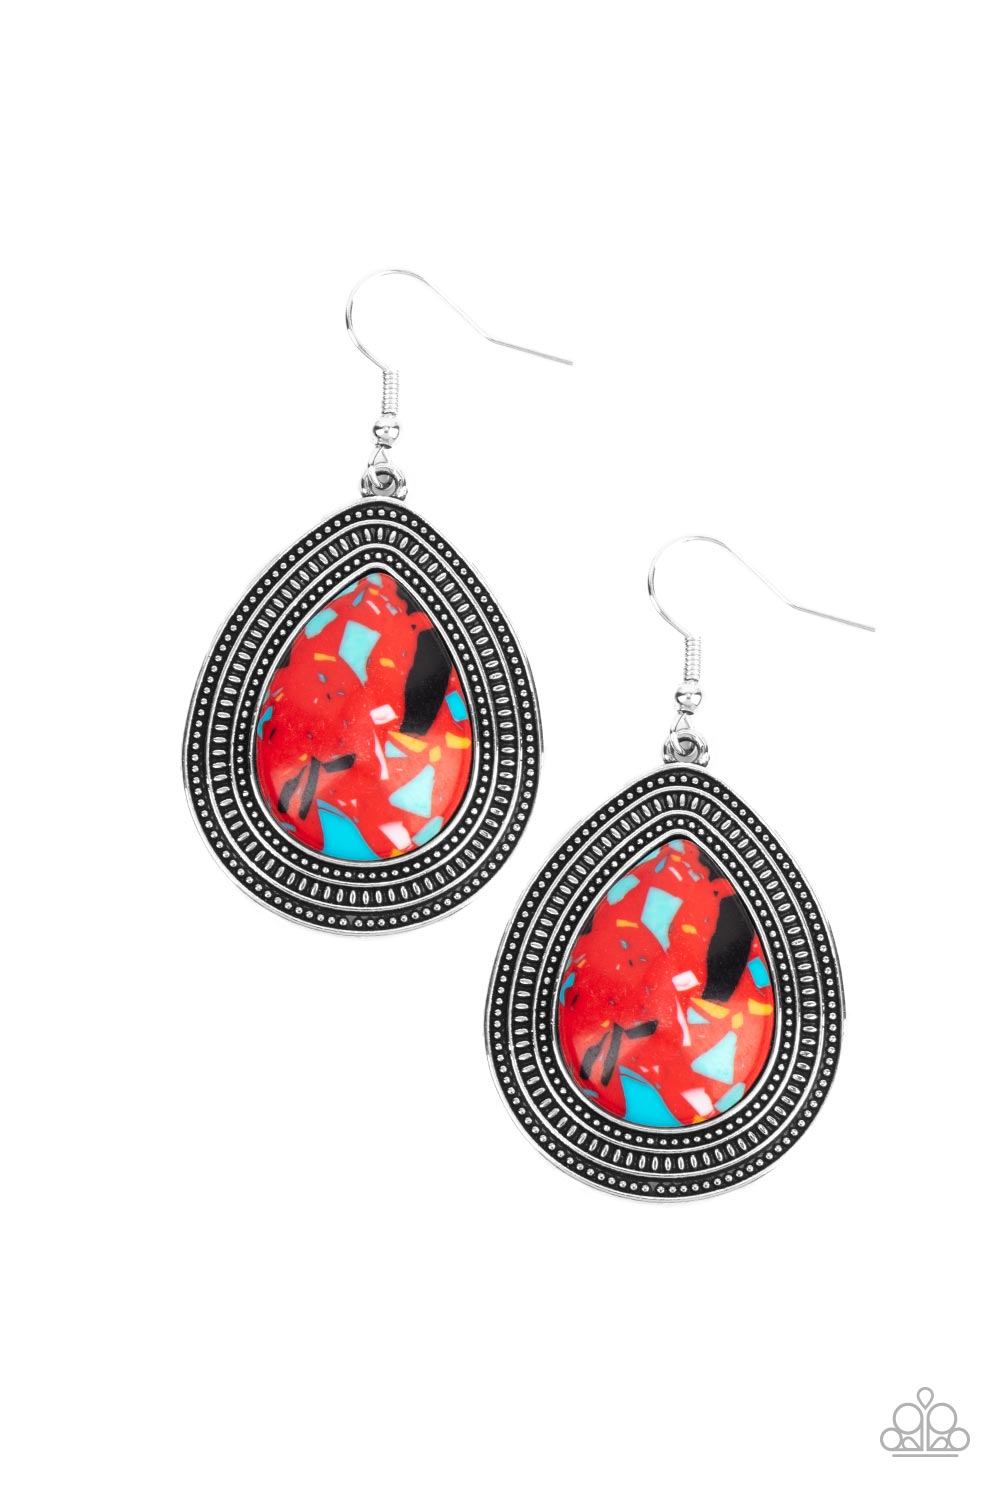 Earrings - Featuring a colorful terrazzo pattern, a red teardrop stone is pressed into the center of a silver frame studded and embossed in borders of tribal inspired textures. Earring attaches to a standard fishhook fitting.  Sold as one pair of earrings.